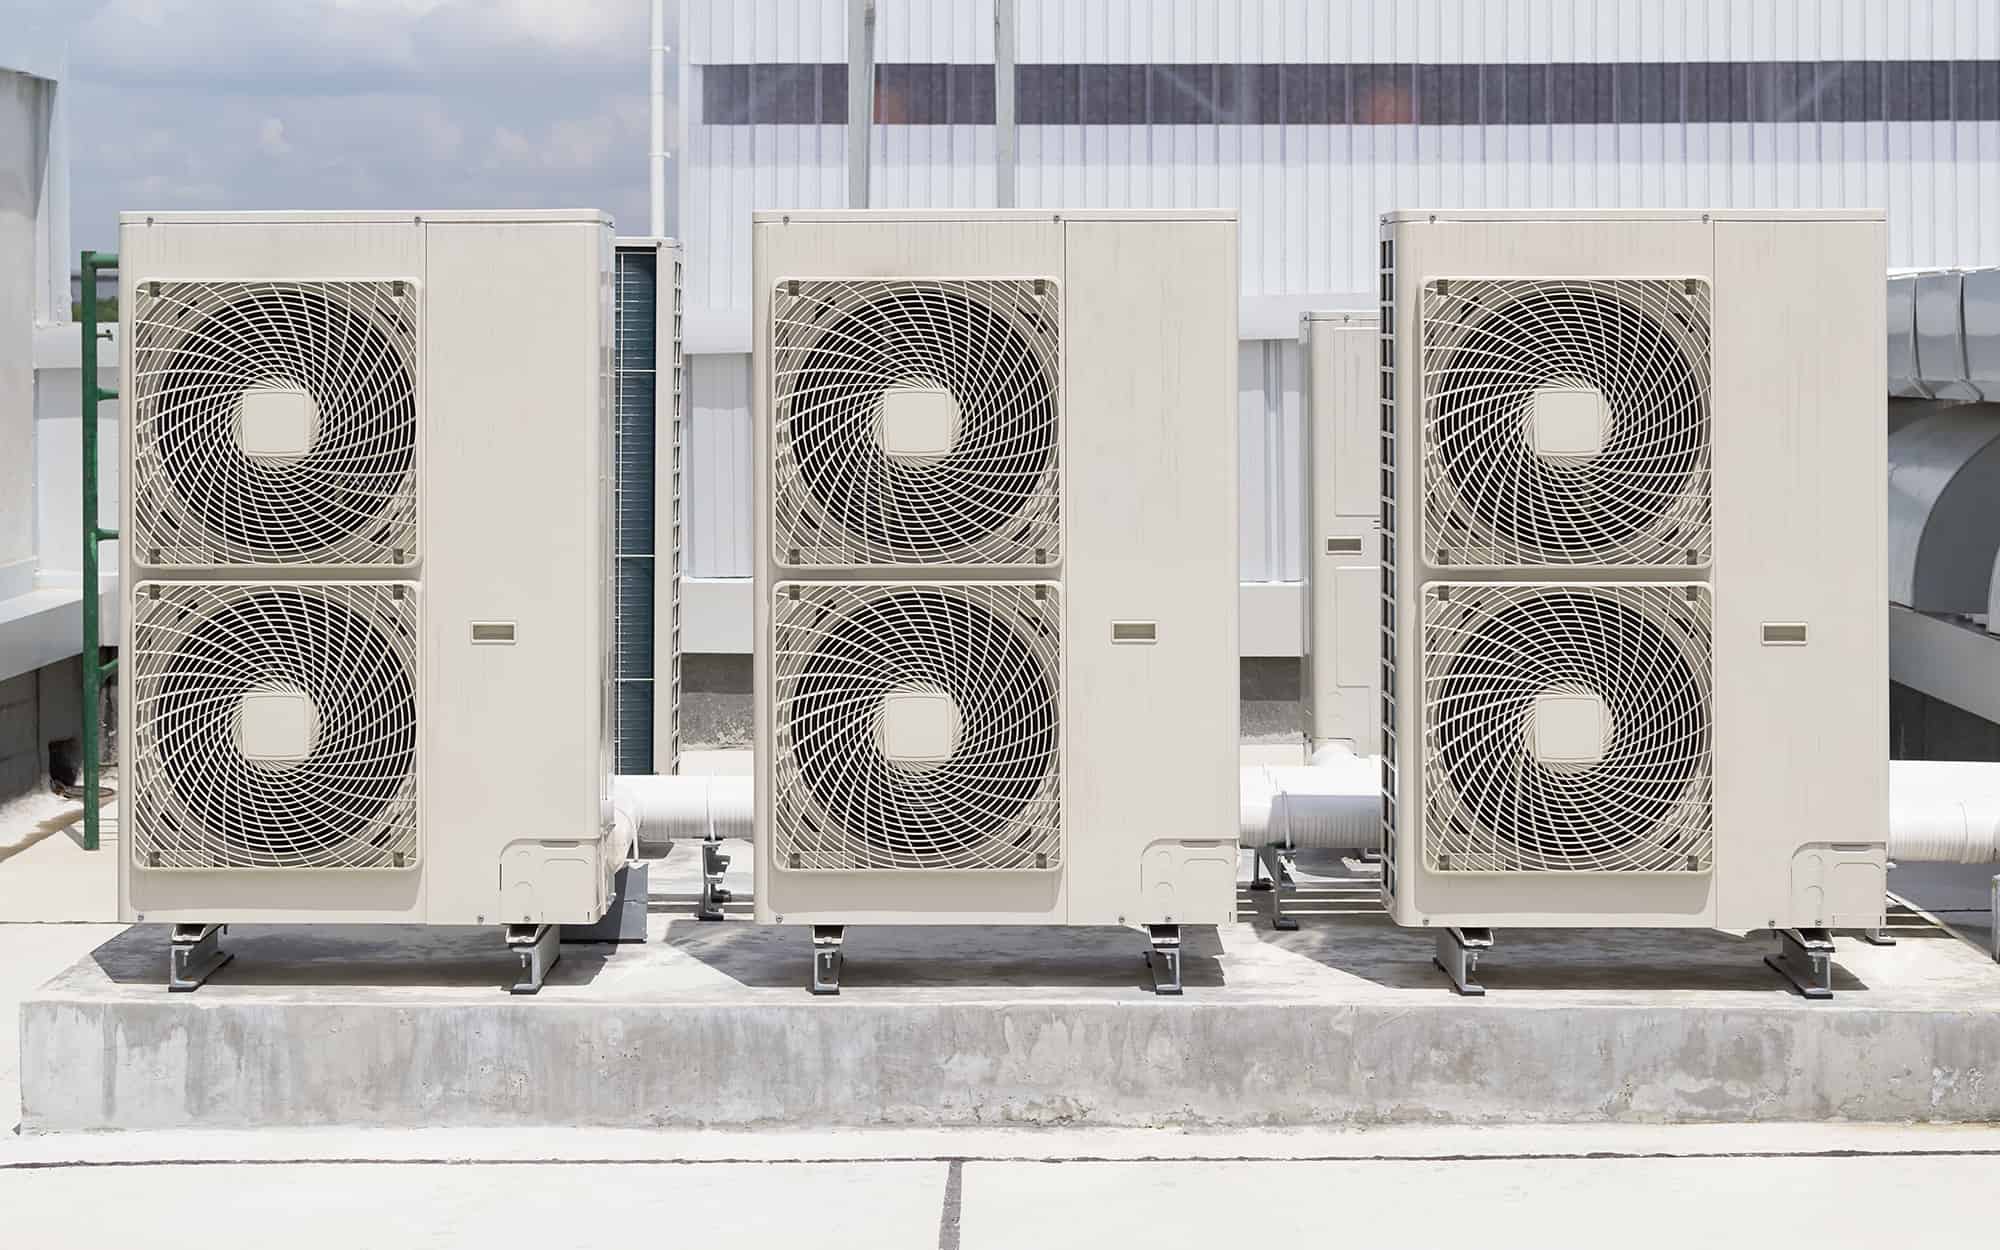 Condenser unit or compressor on roof of industrial plant building with sky background